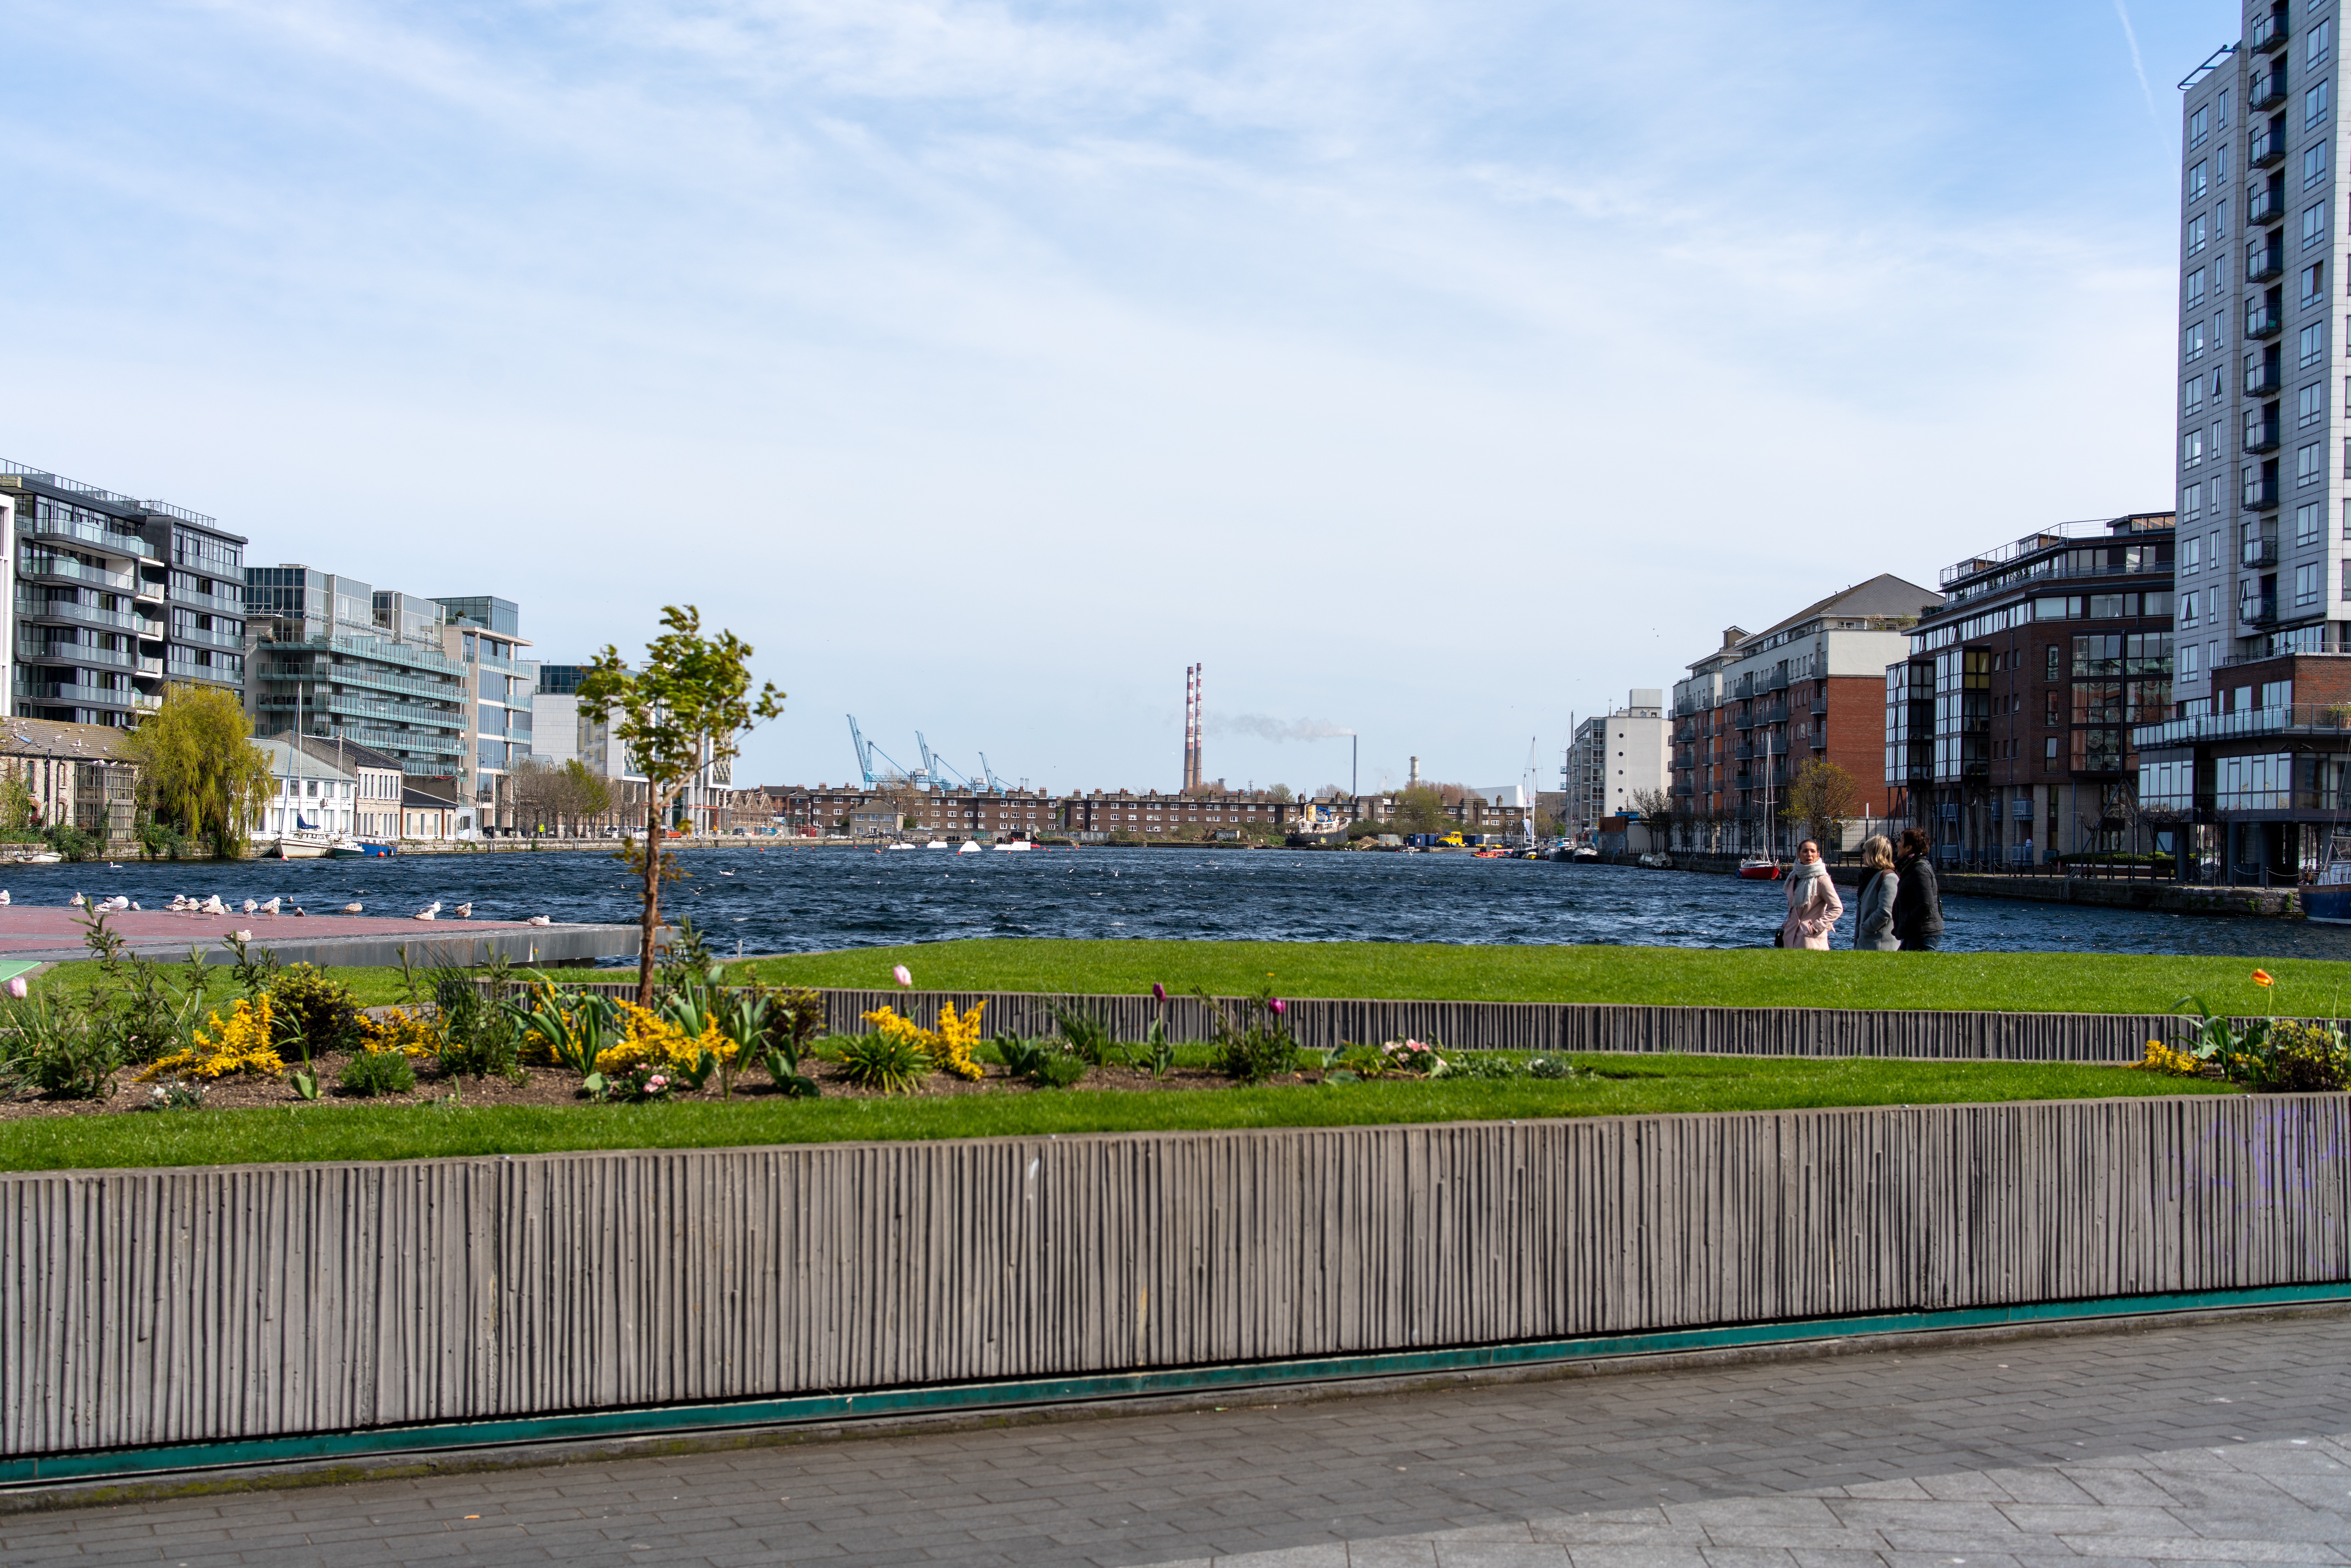  GRAND CANAL SQUARE 008 